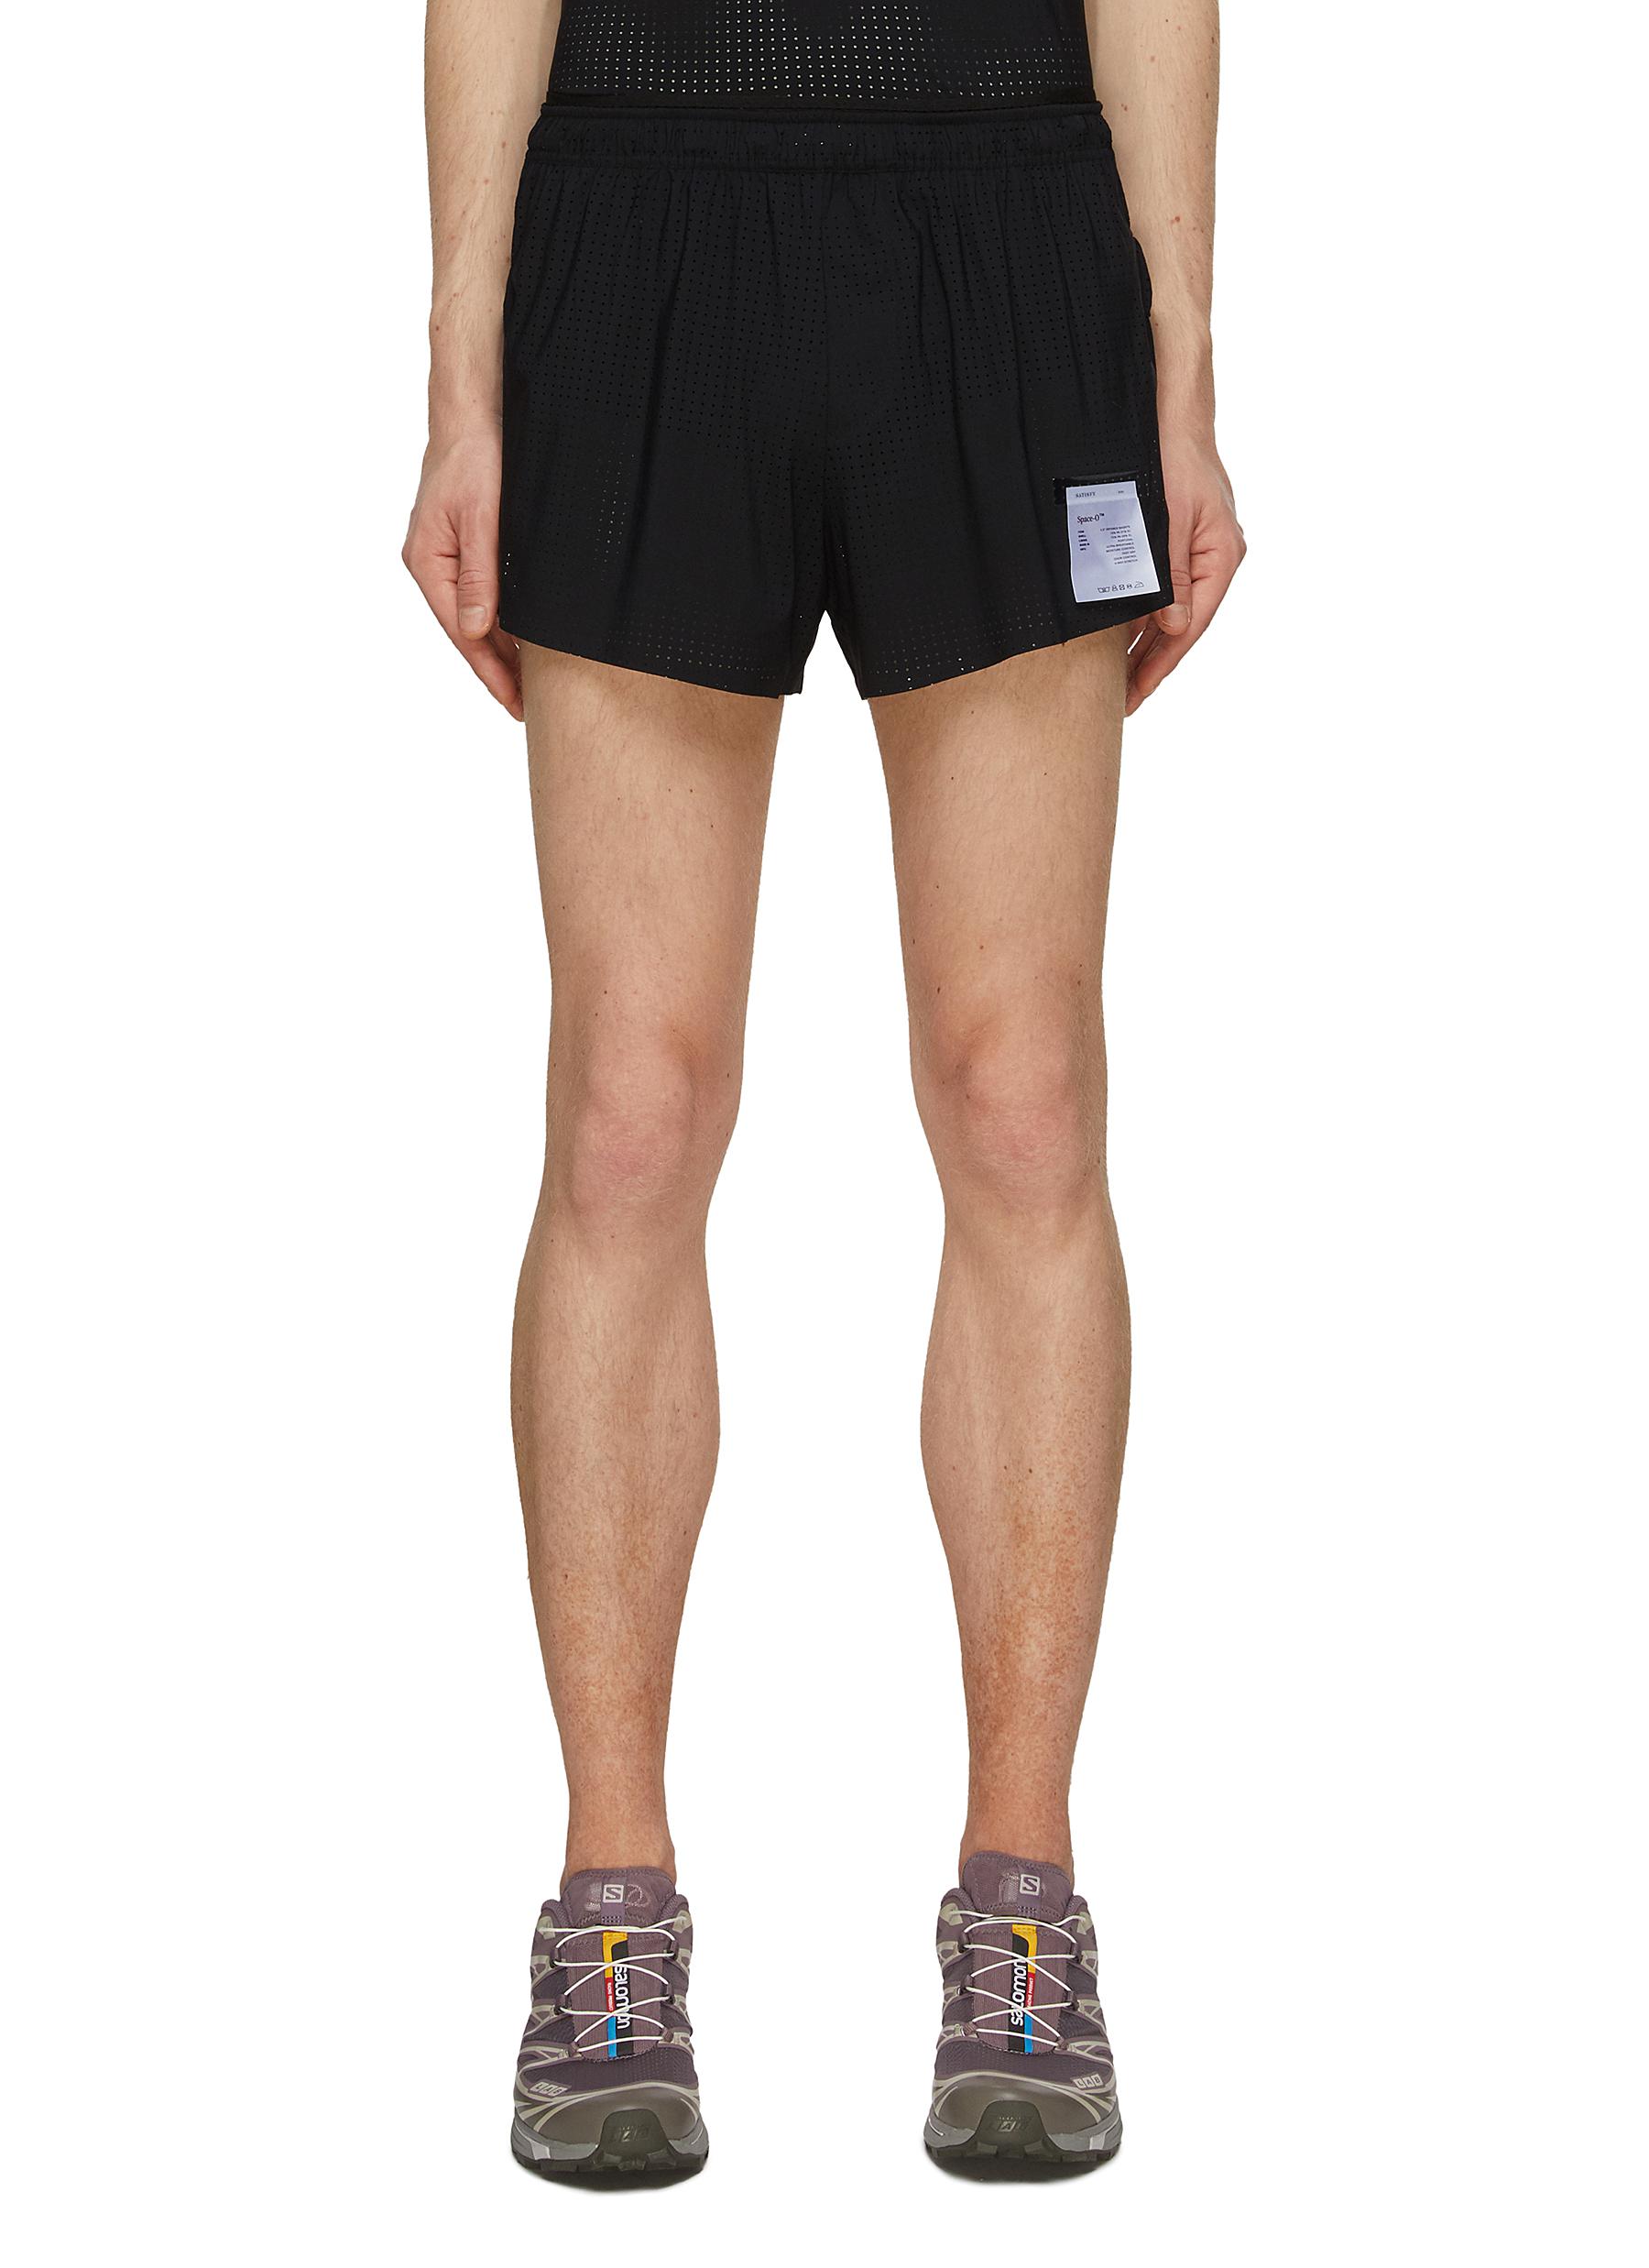 ON Active Shorts – 2 in 1 shorts (W) – Black/Stratosphere – Best